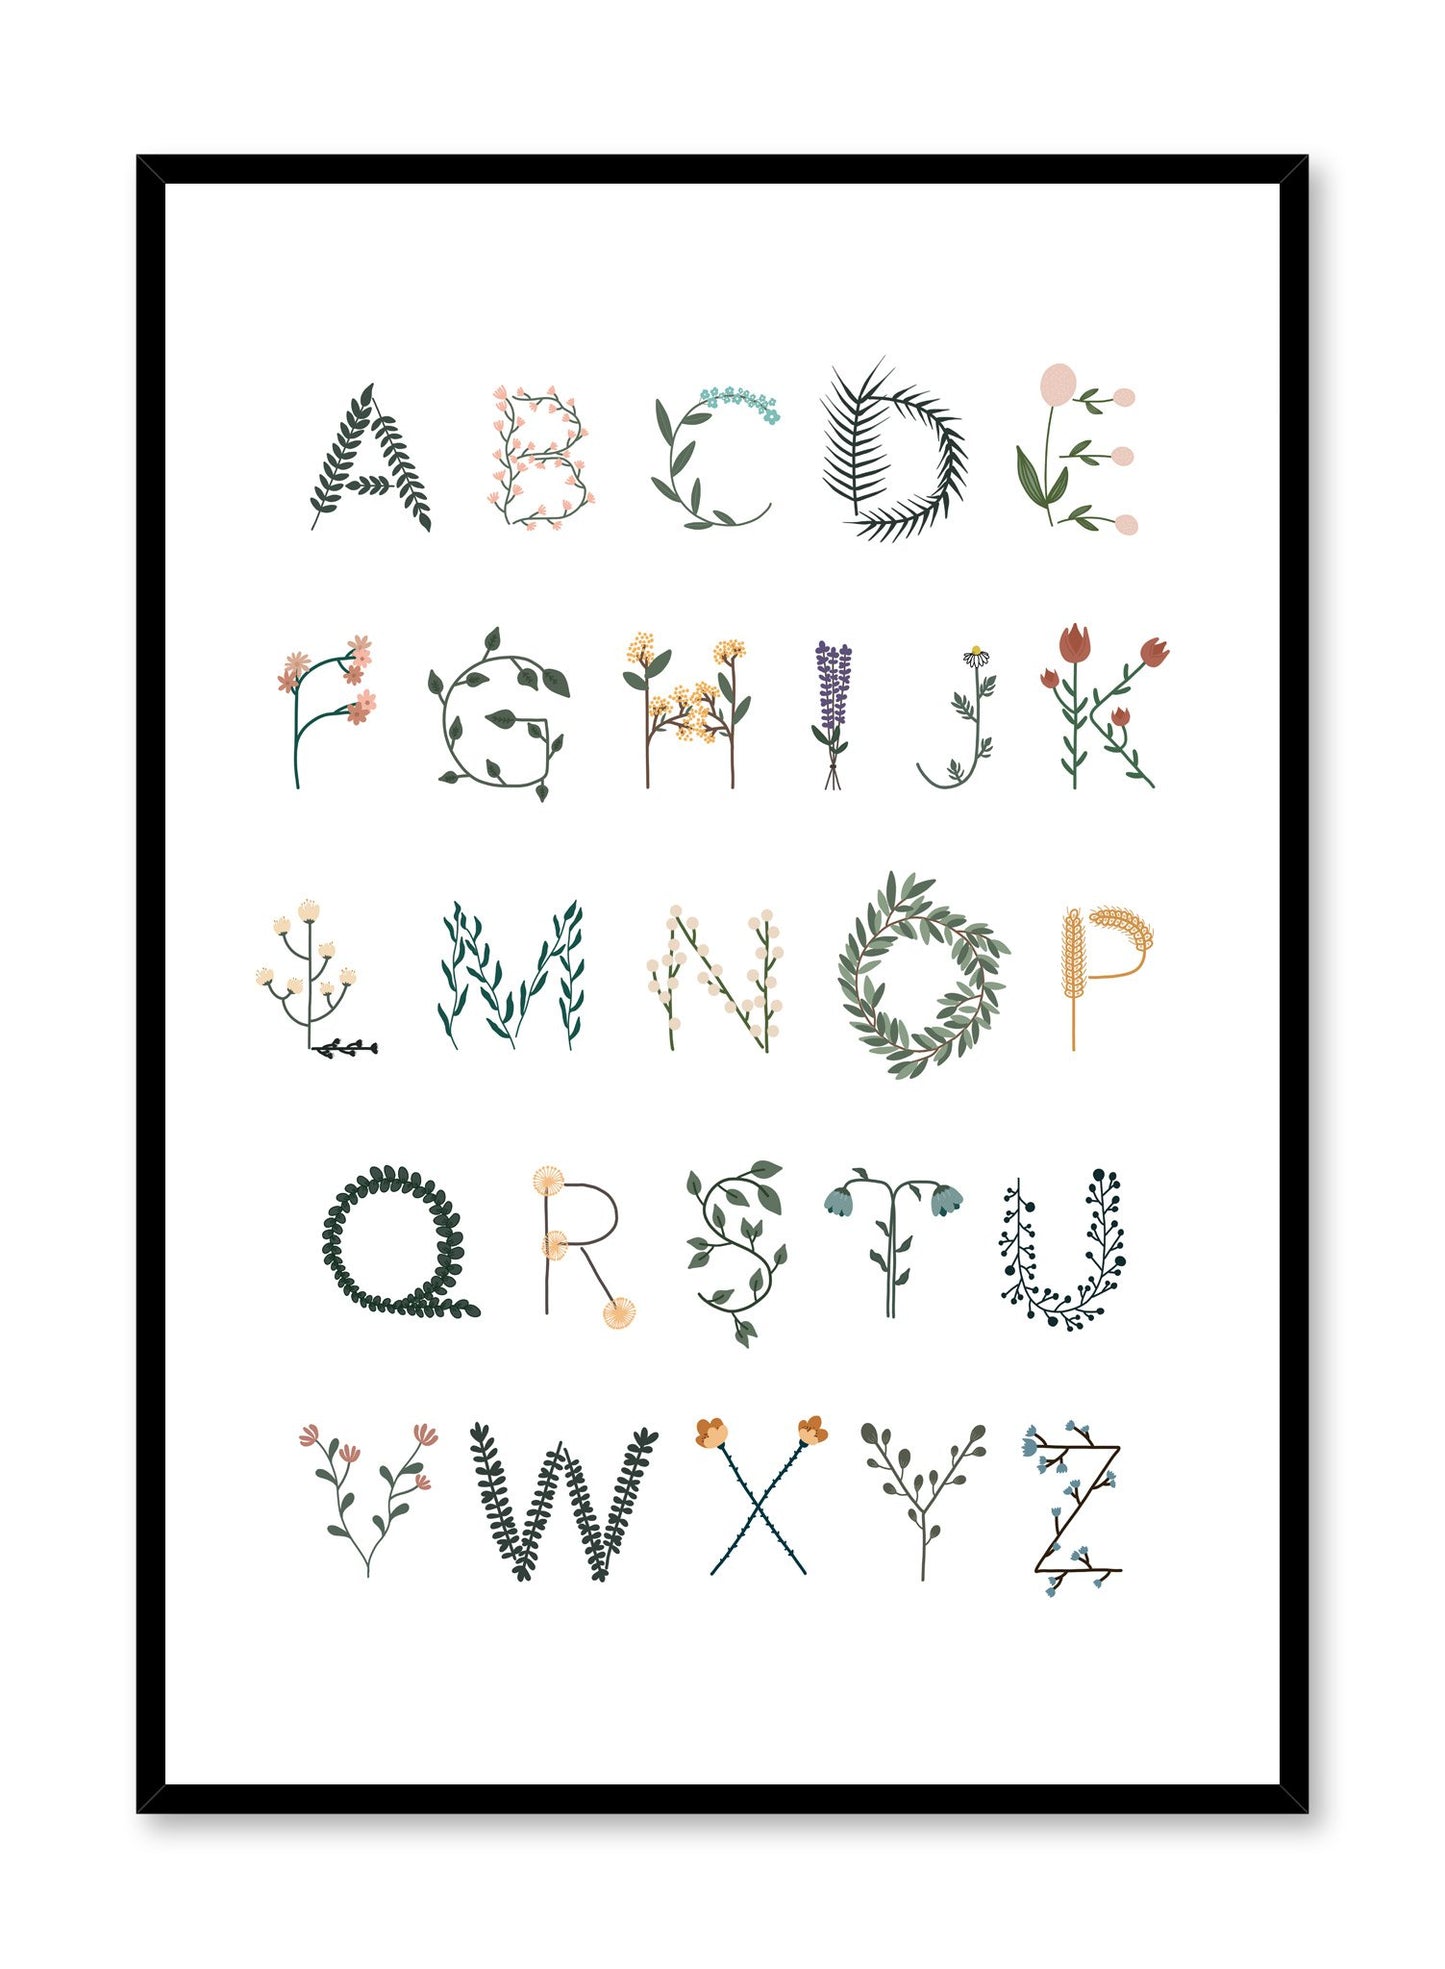 Modern minimalist typography poster by Opposite Wall with Alphabet in Flowers